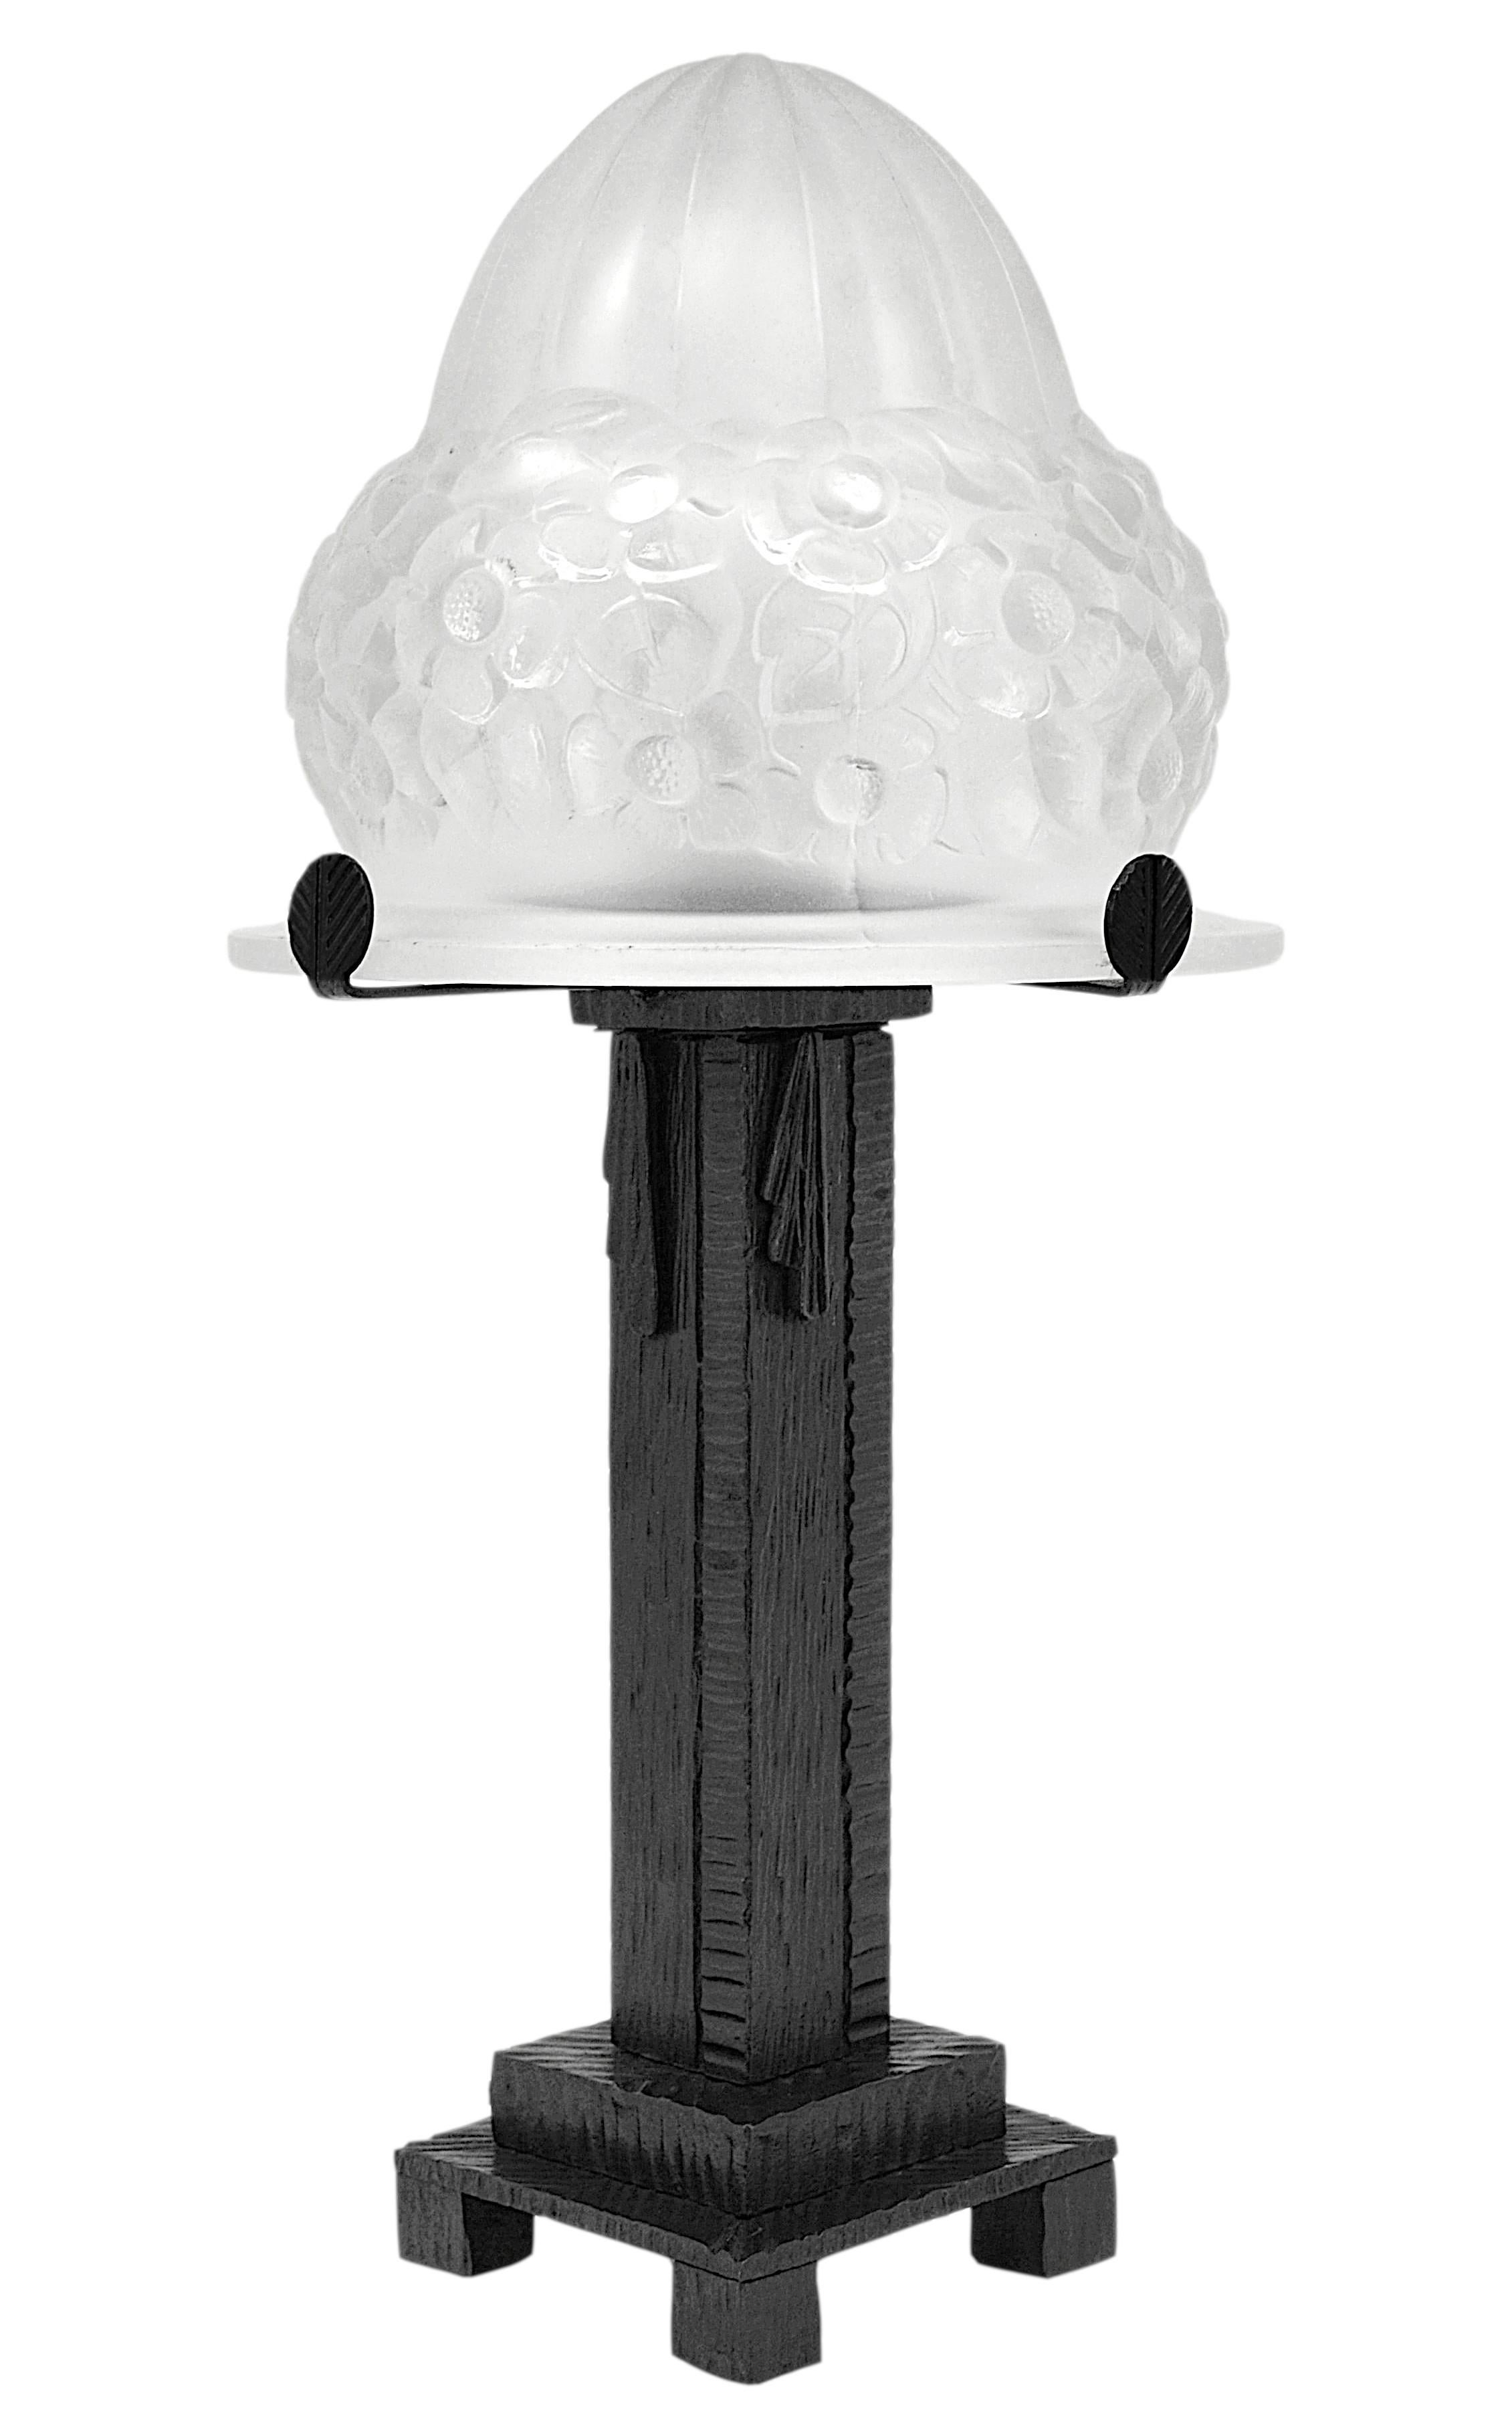 French Art Deco table lamp by Pierre Gilles, 27 rue Esquirol, Paris 13e, France, ca.1930. Glass and wrought-iron. Same period as Hettier-Vincent, Muller Freres. Thick molded glass shade. Superb wrought-iron base. Measures: Height: 17.1